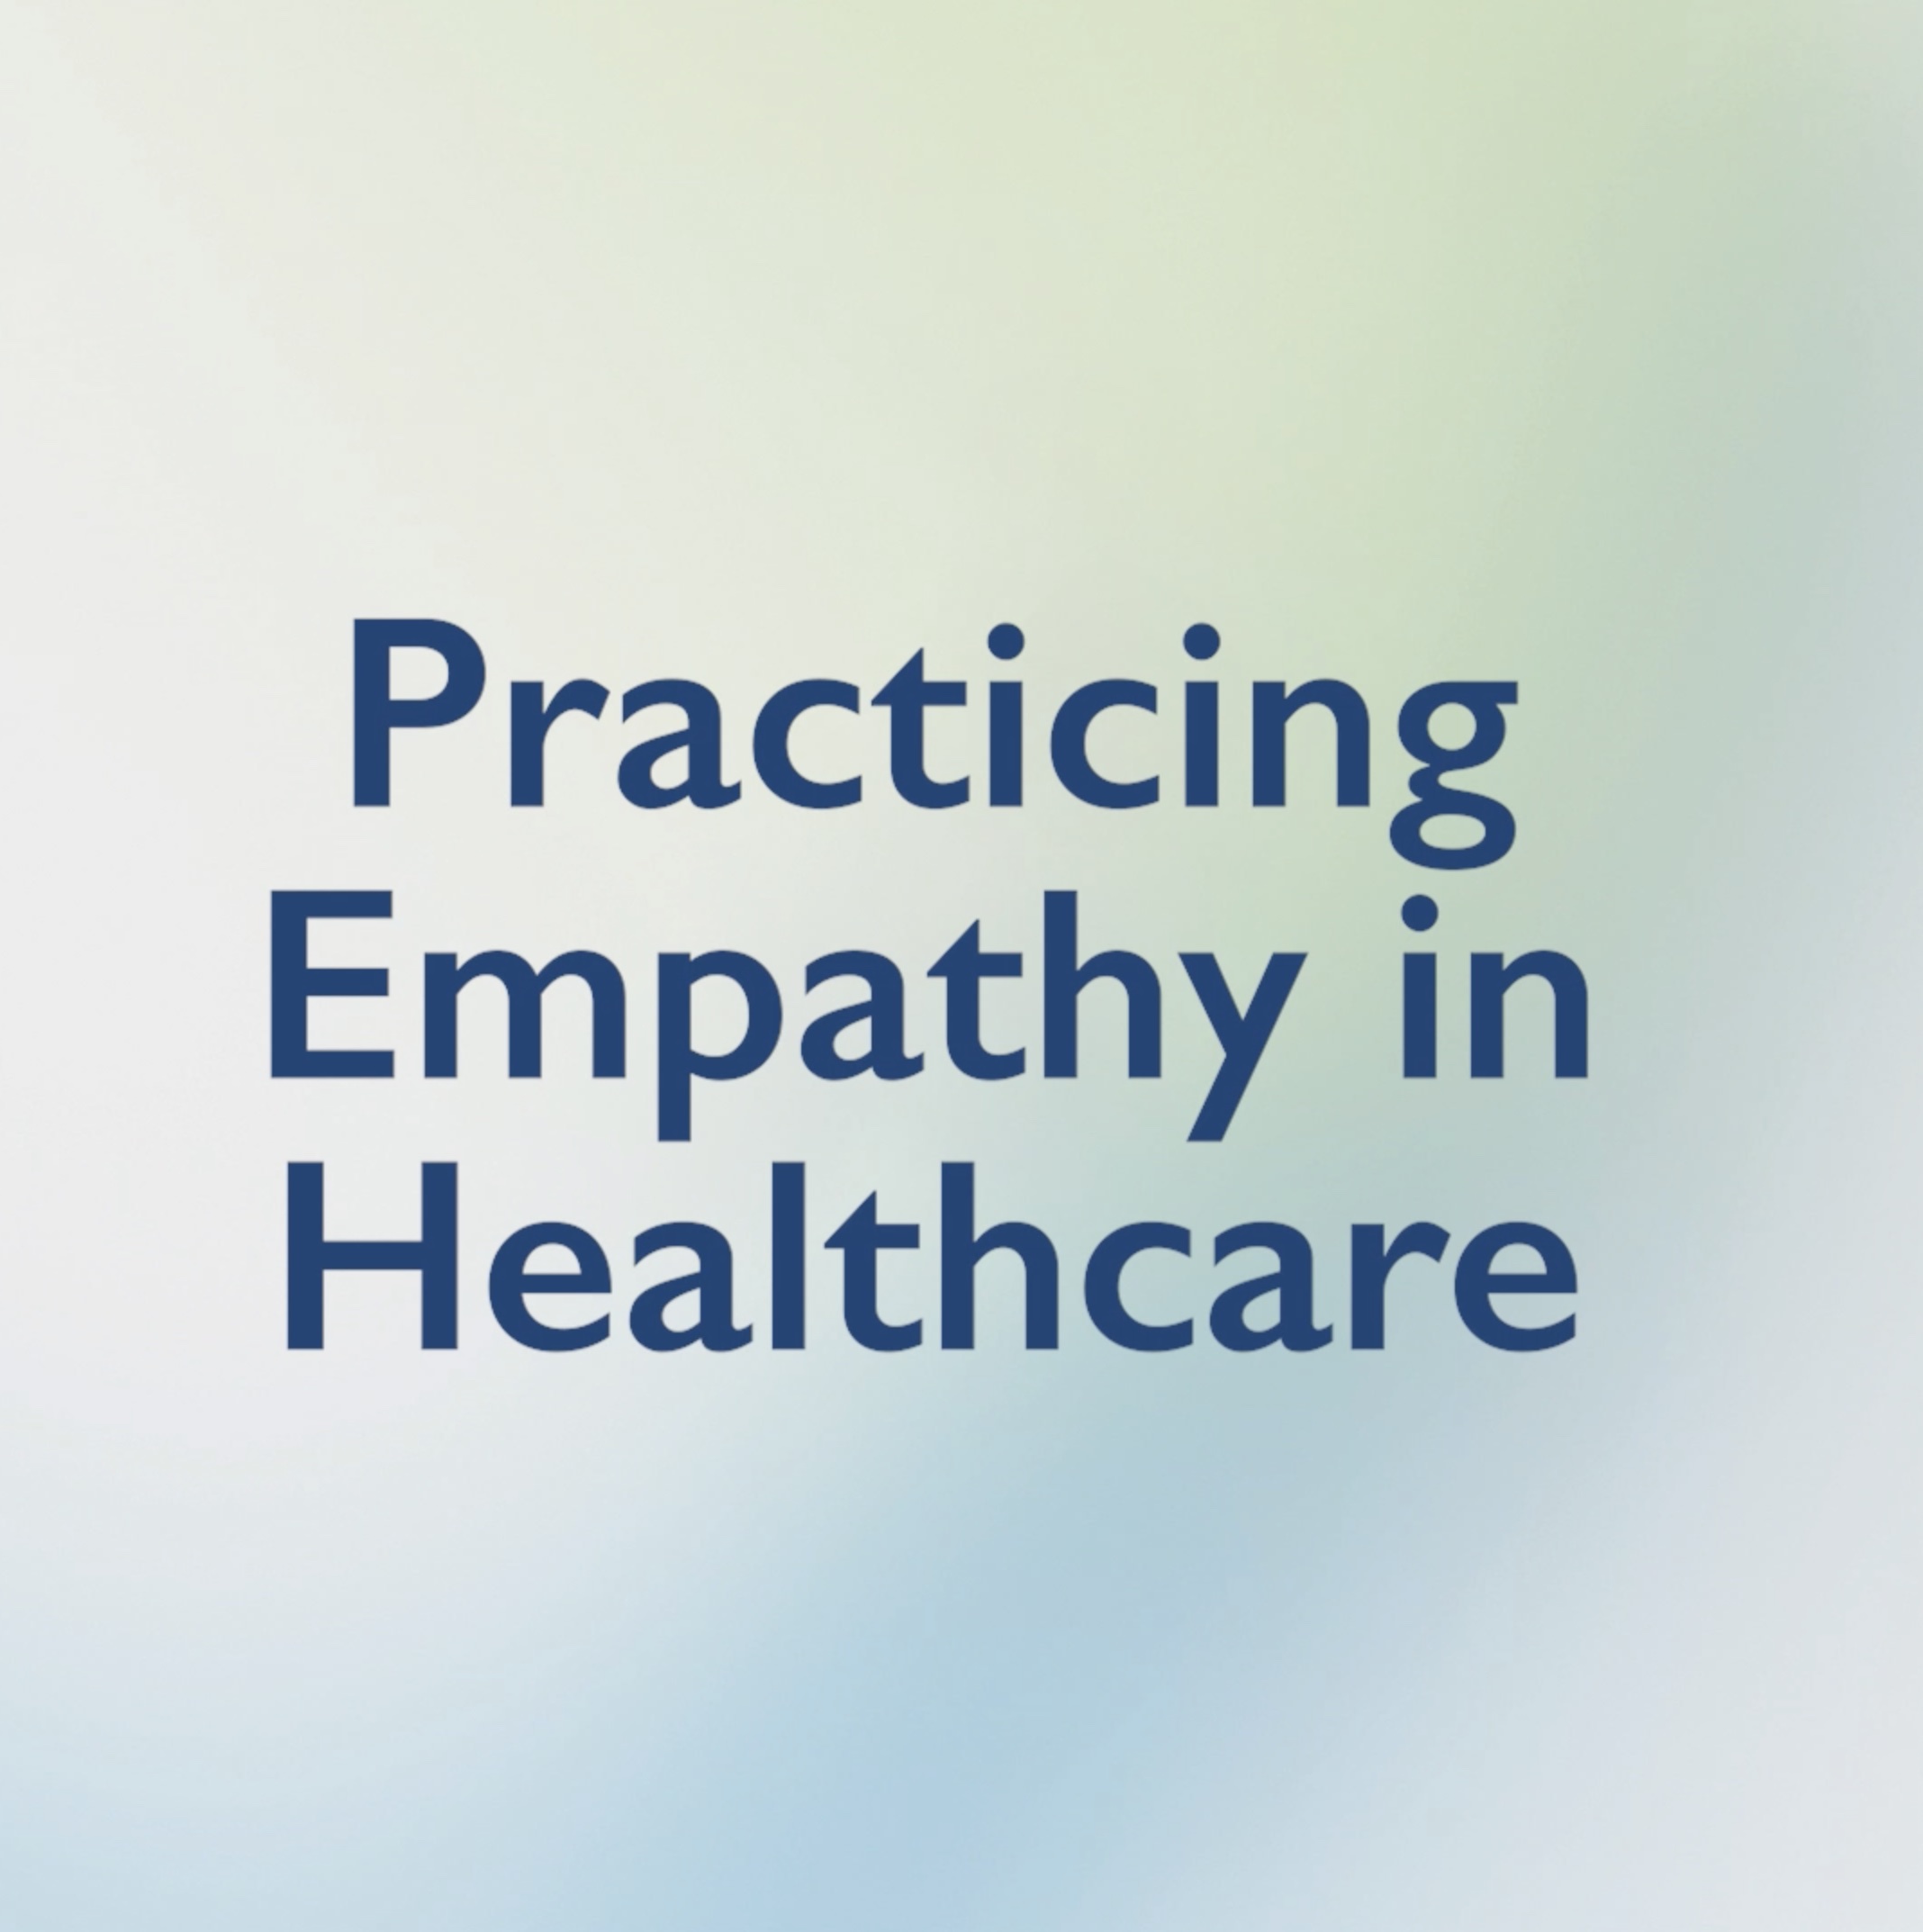 Practicing Empathy in Healthcare